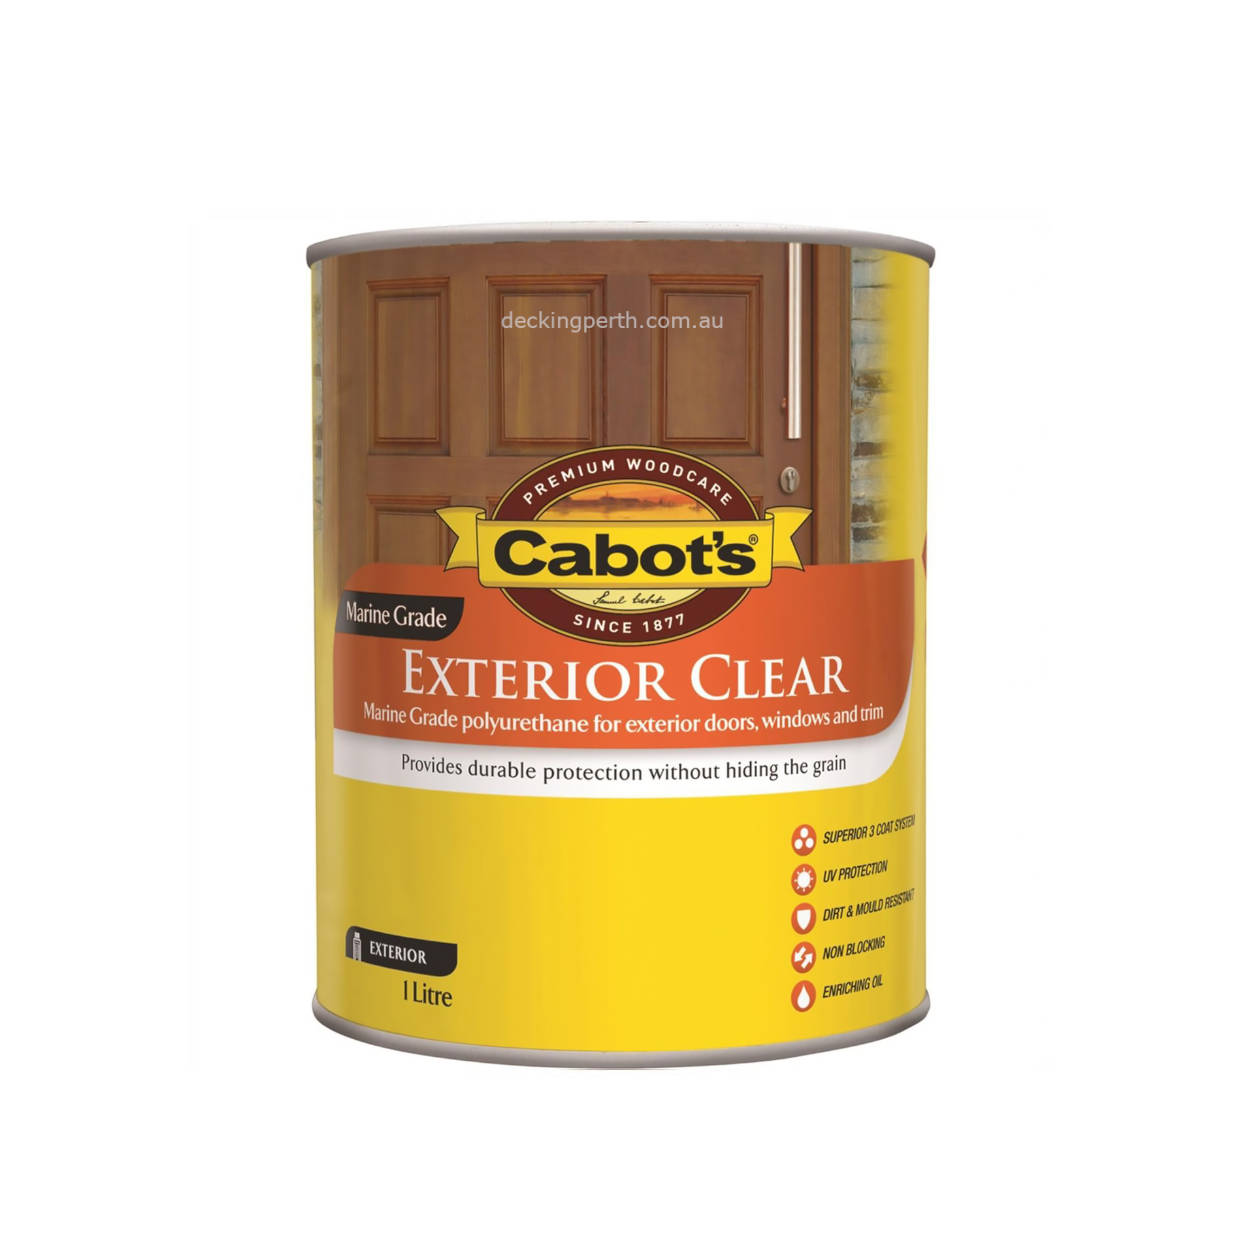 Cabots_Exterior_Clear_Oil_Based_1_litre_Decking_Perth